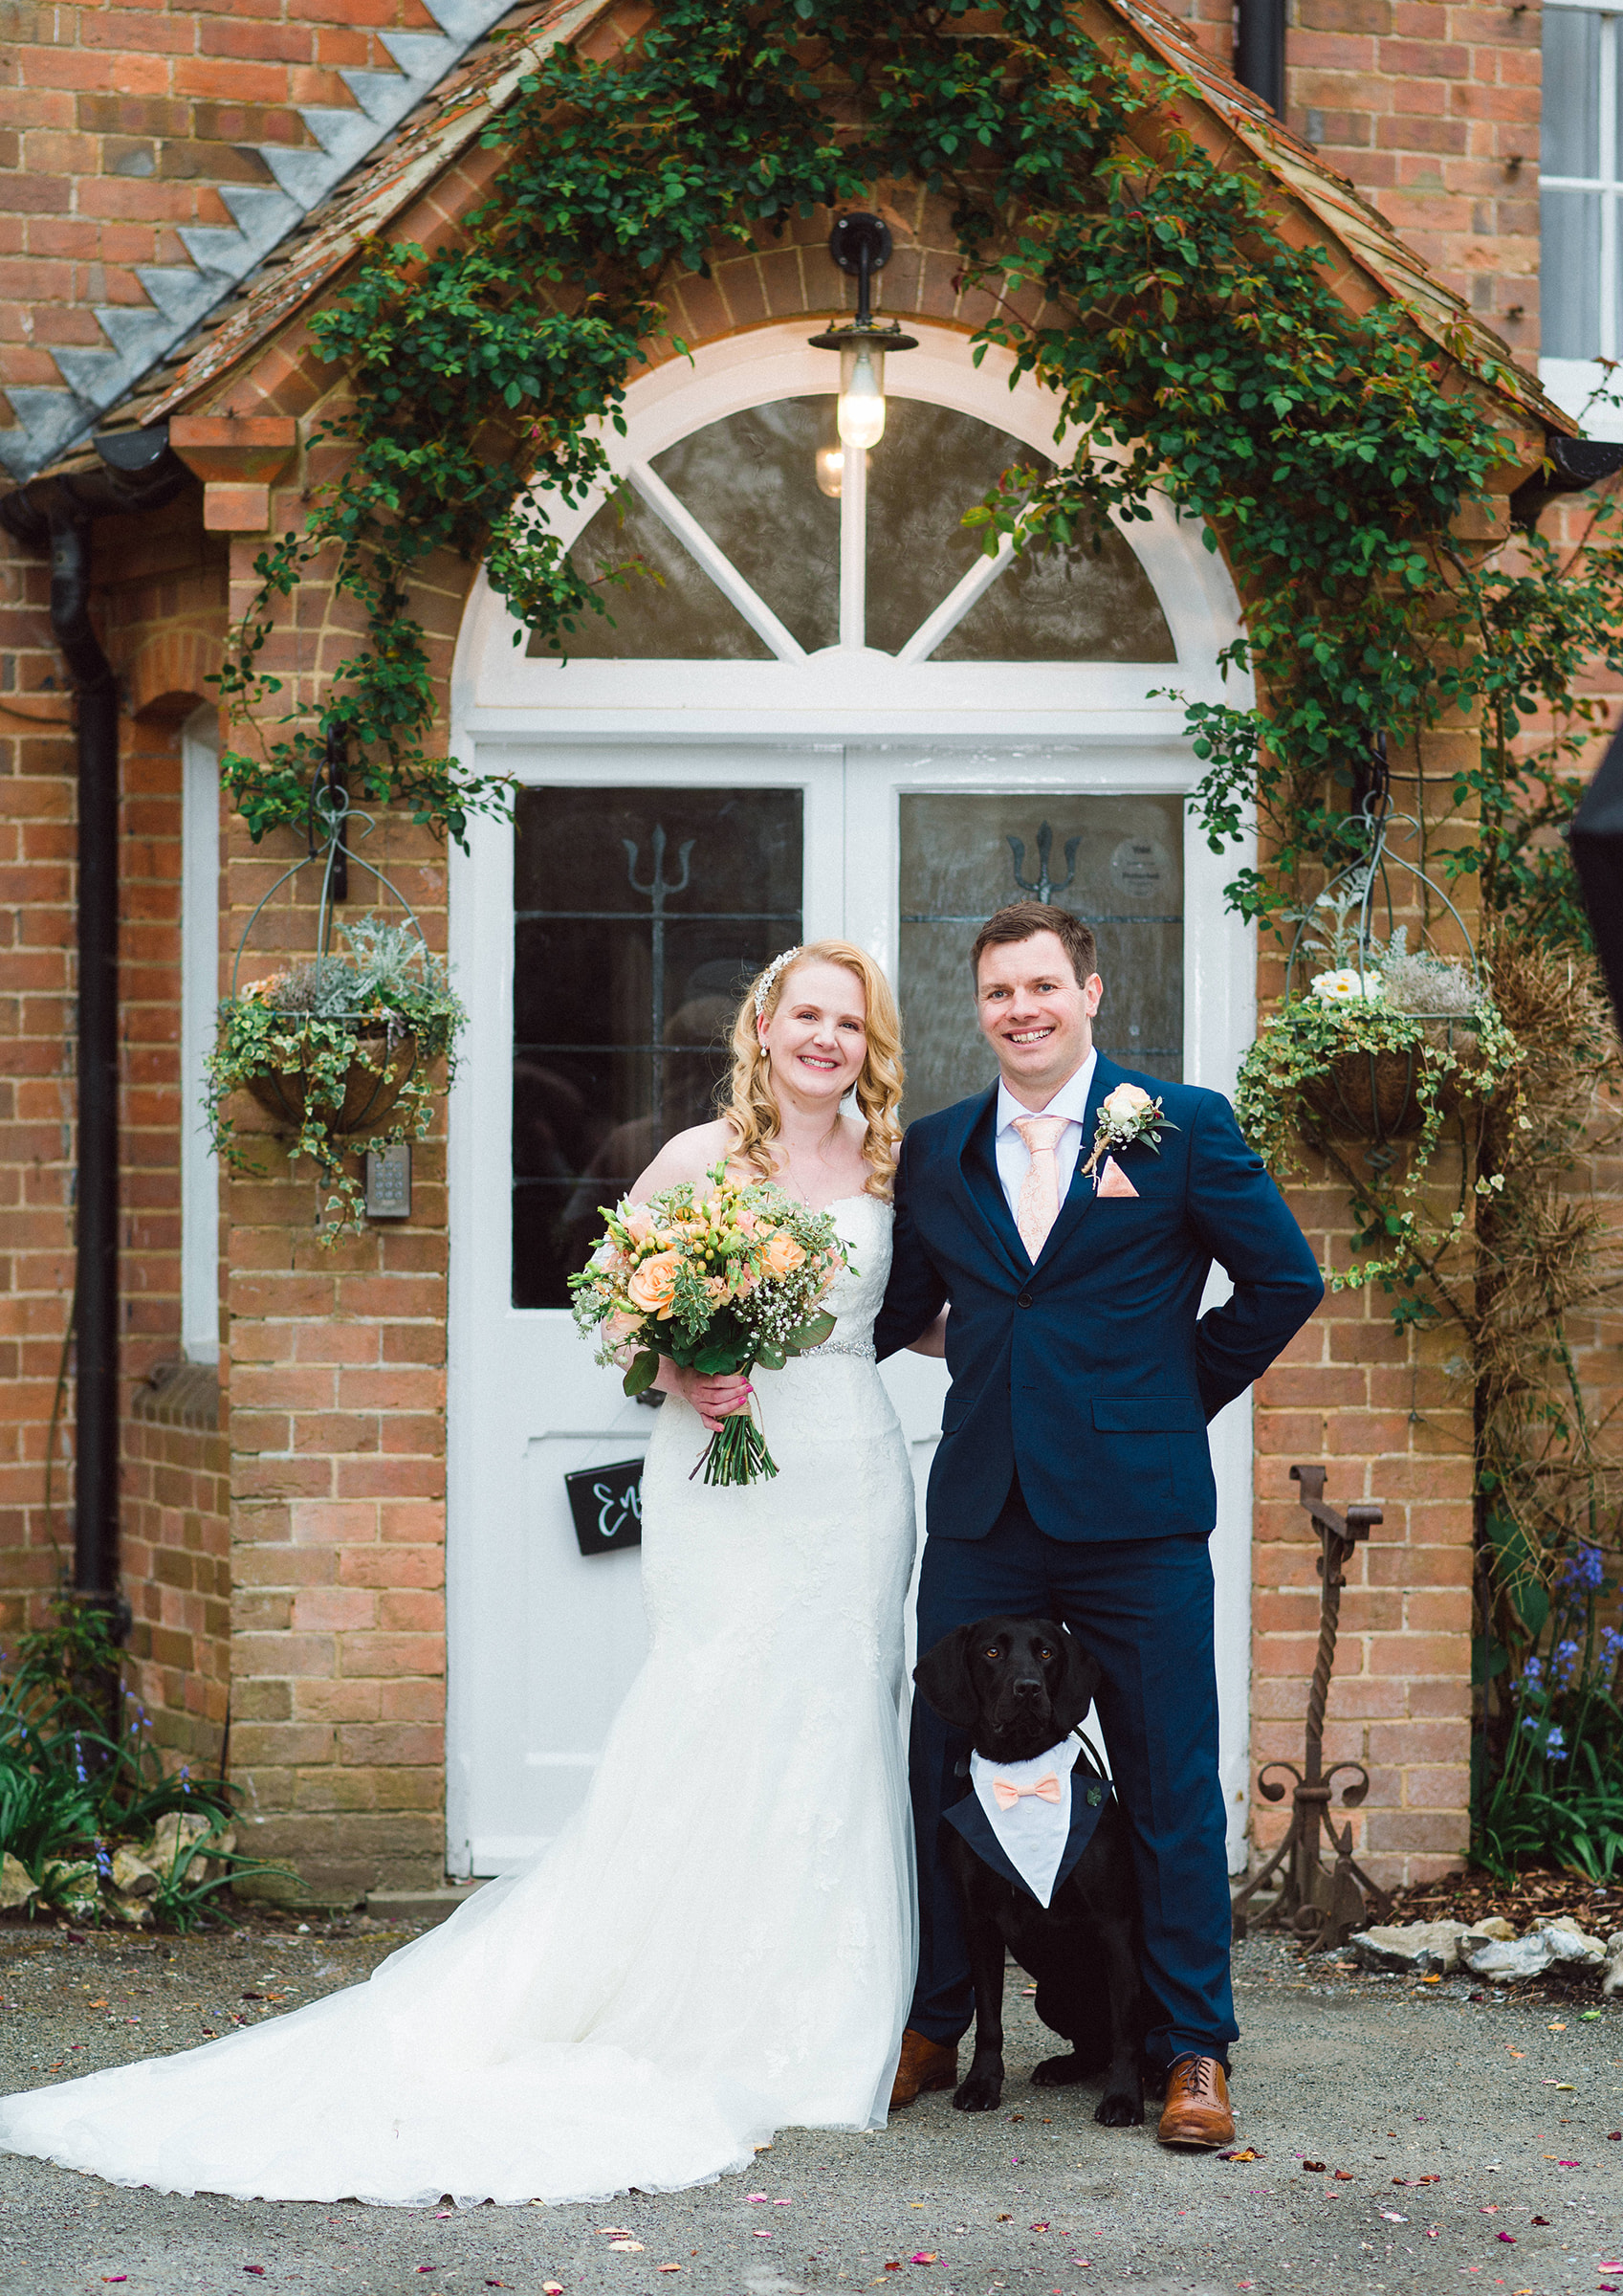 Lewis and Sarah exchanging vows at The Old Rectory, Berkshire wedding venue.